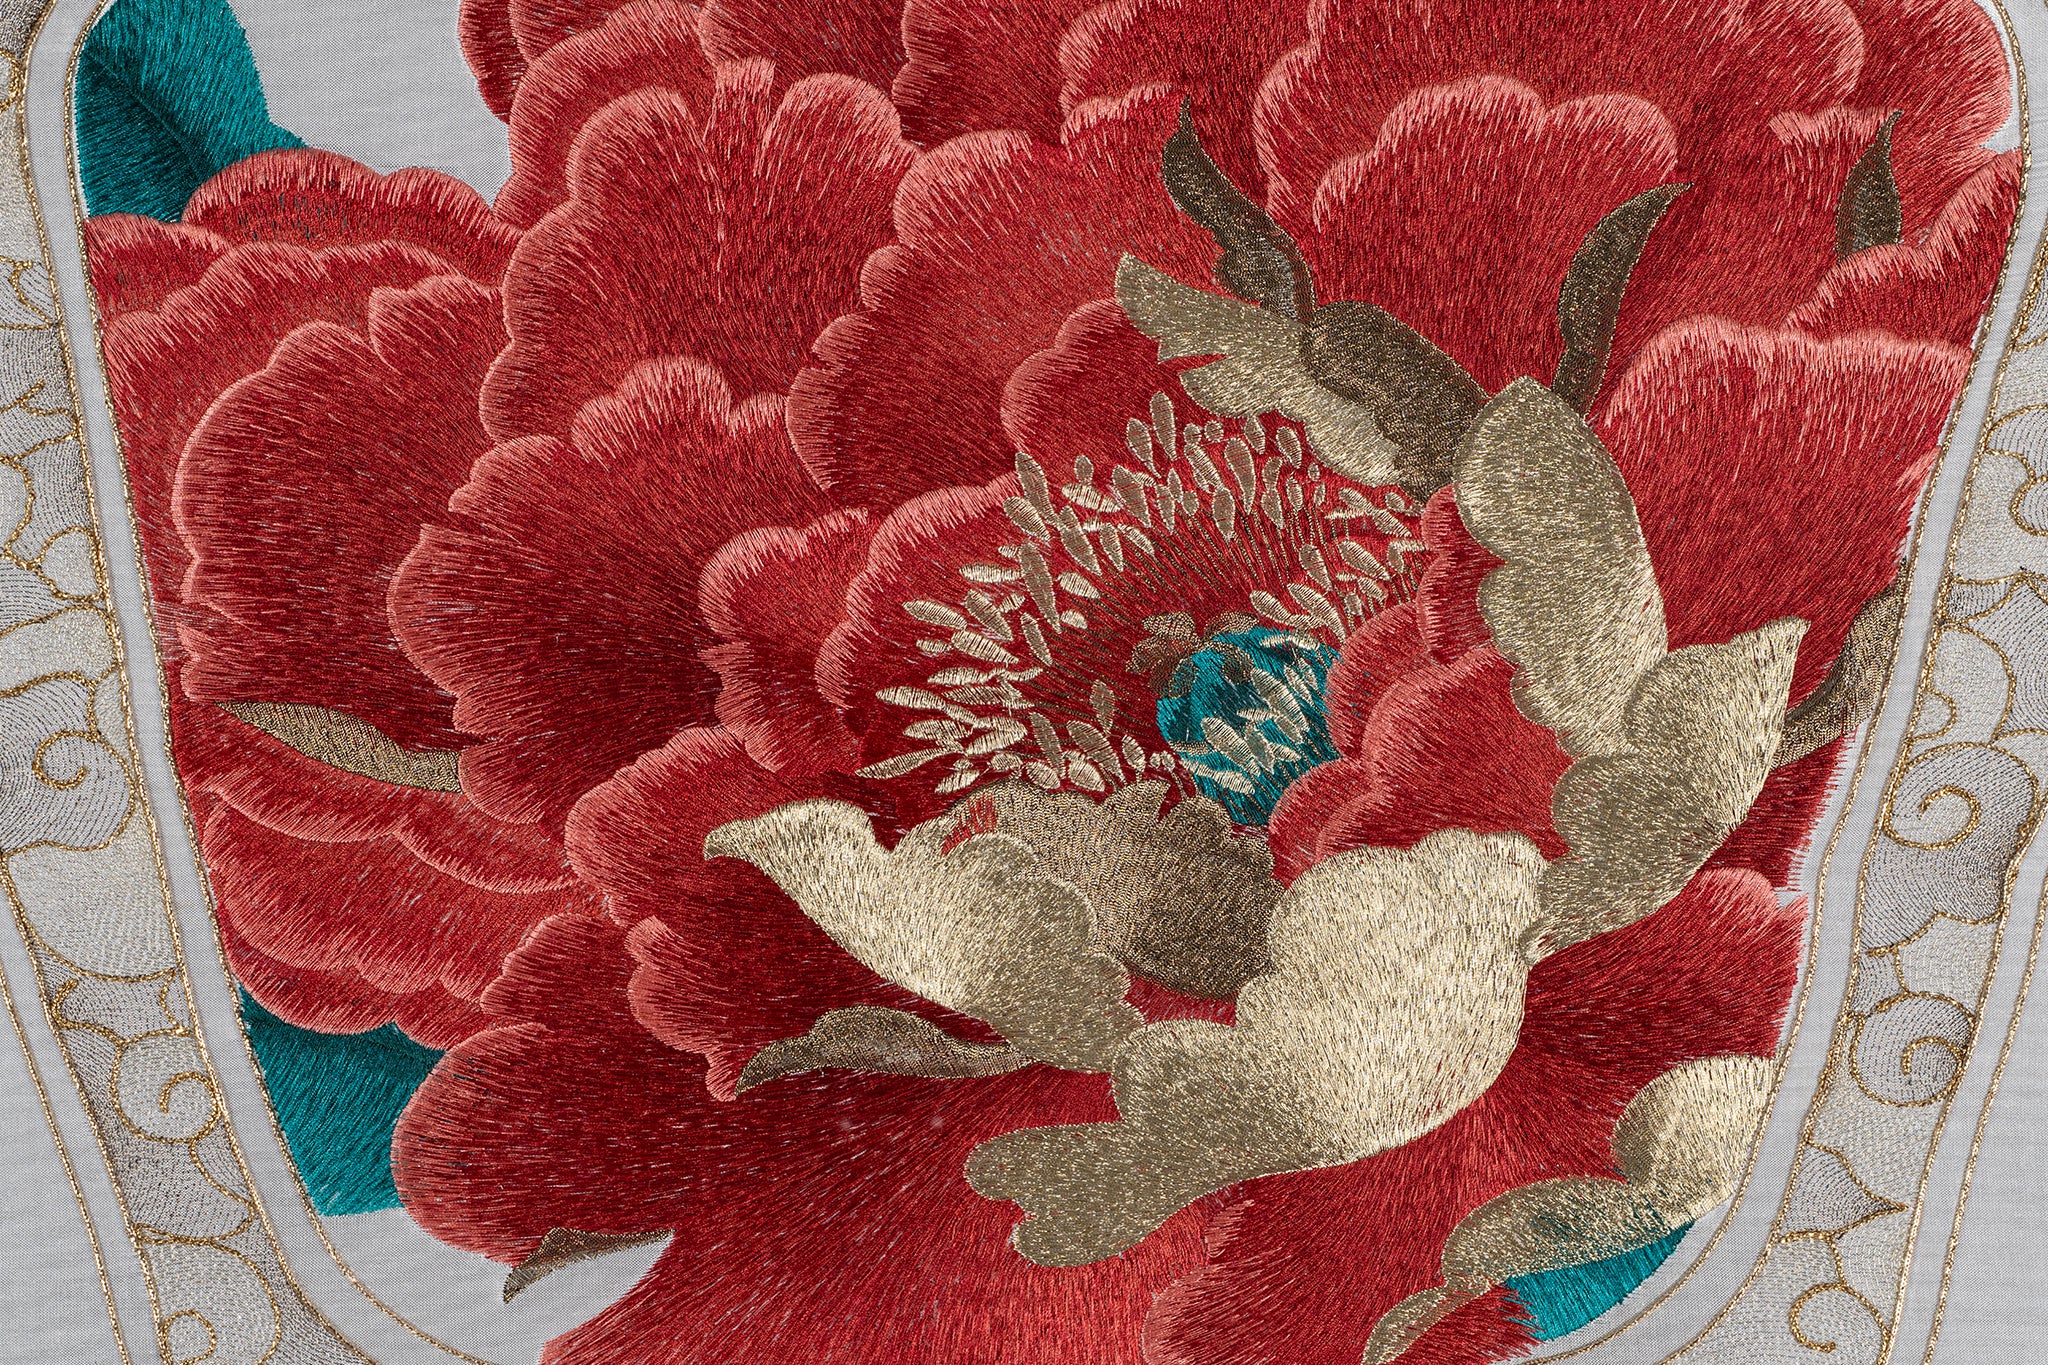 The outer petals of the peony are all embroidered with bright red silk thread